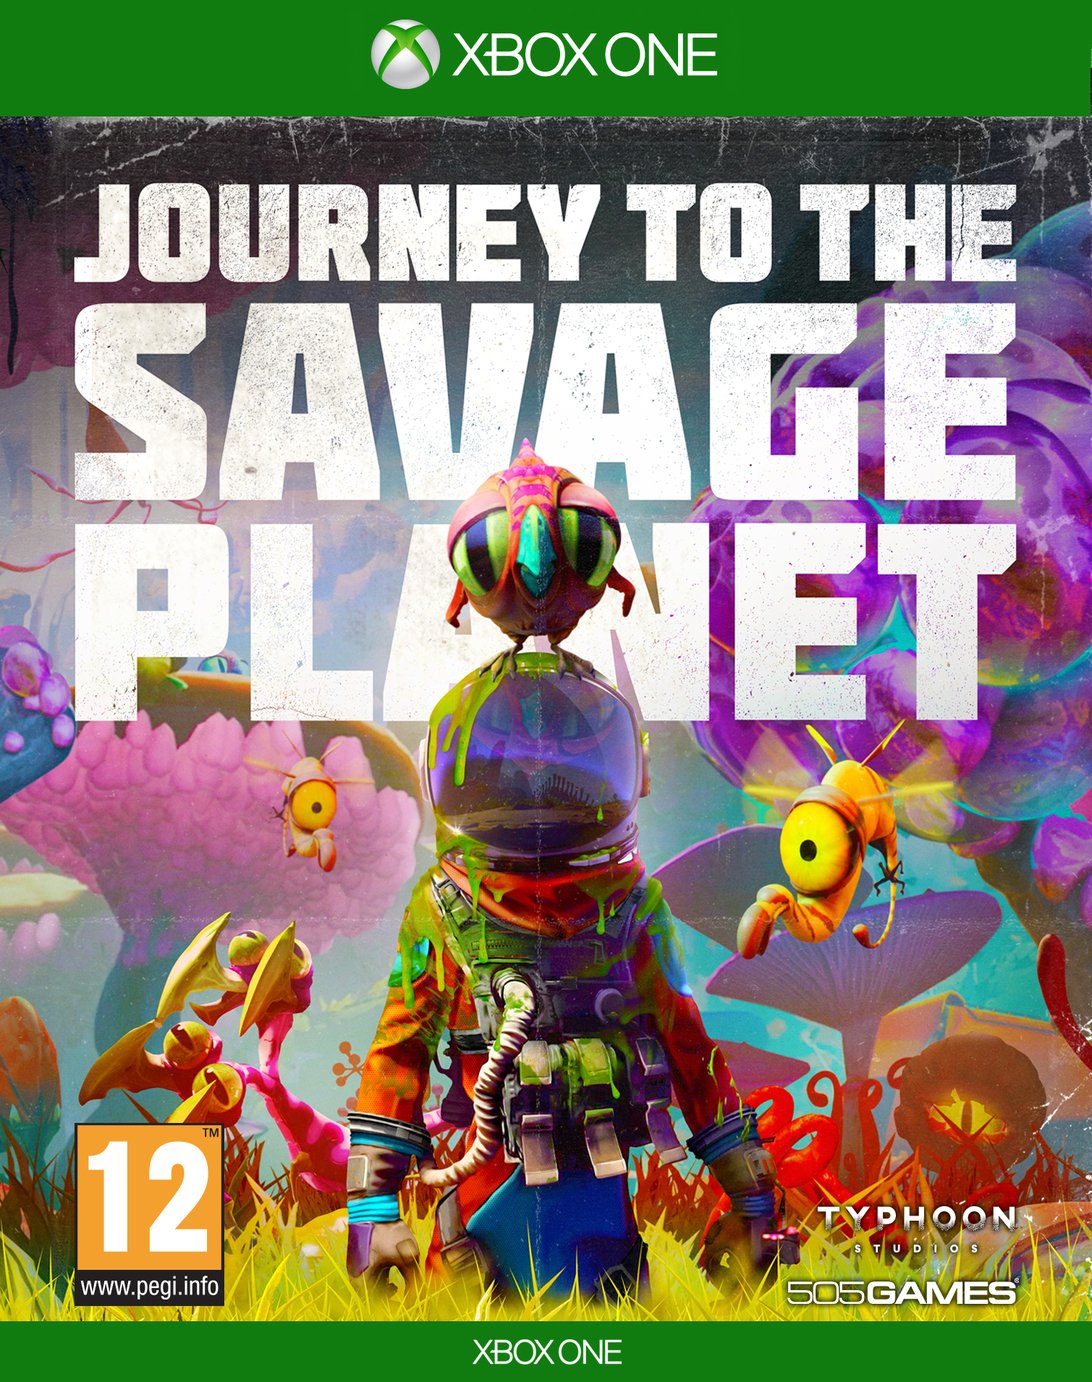 Journey to Savage Planet Xbox One Pre-Order Game